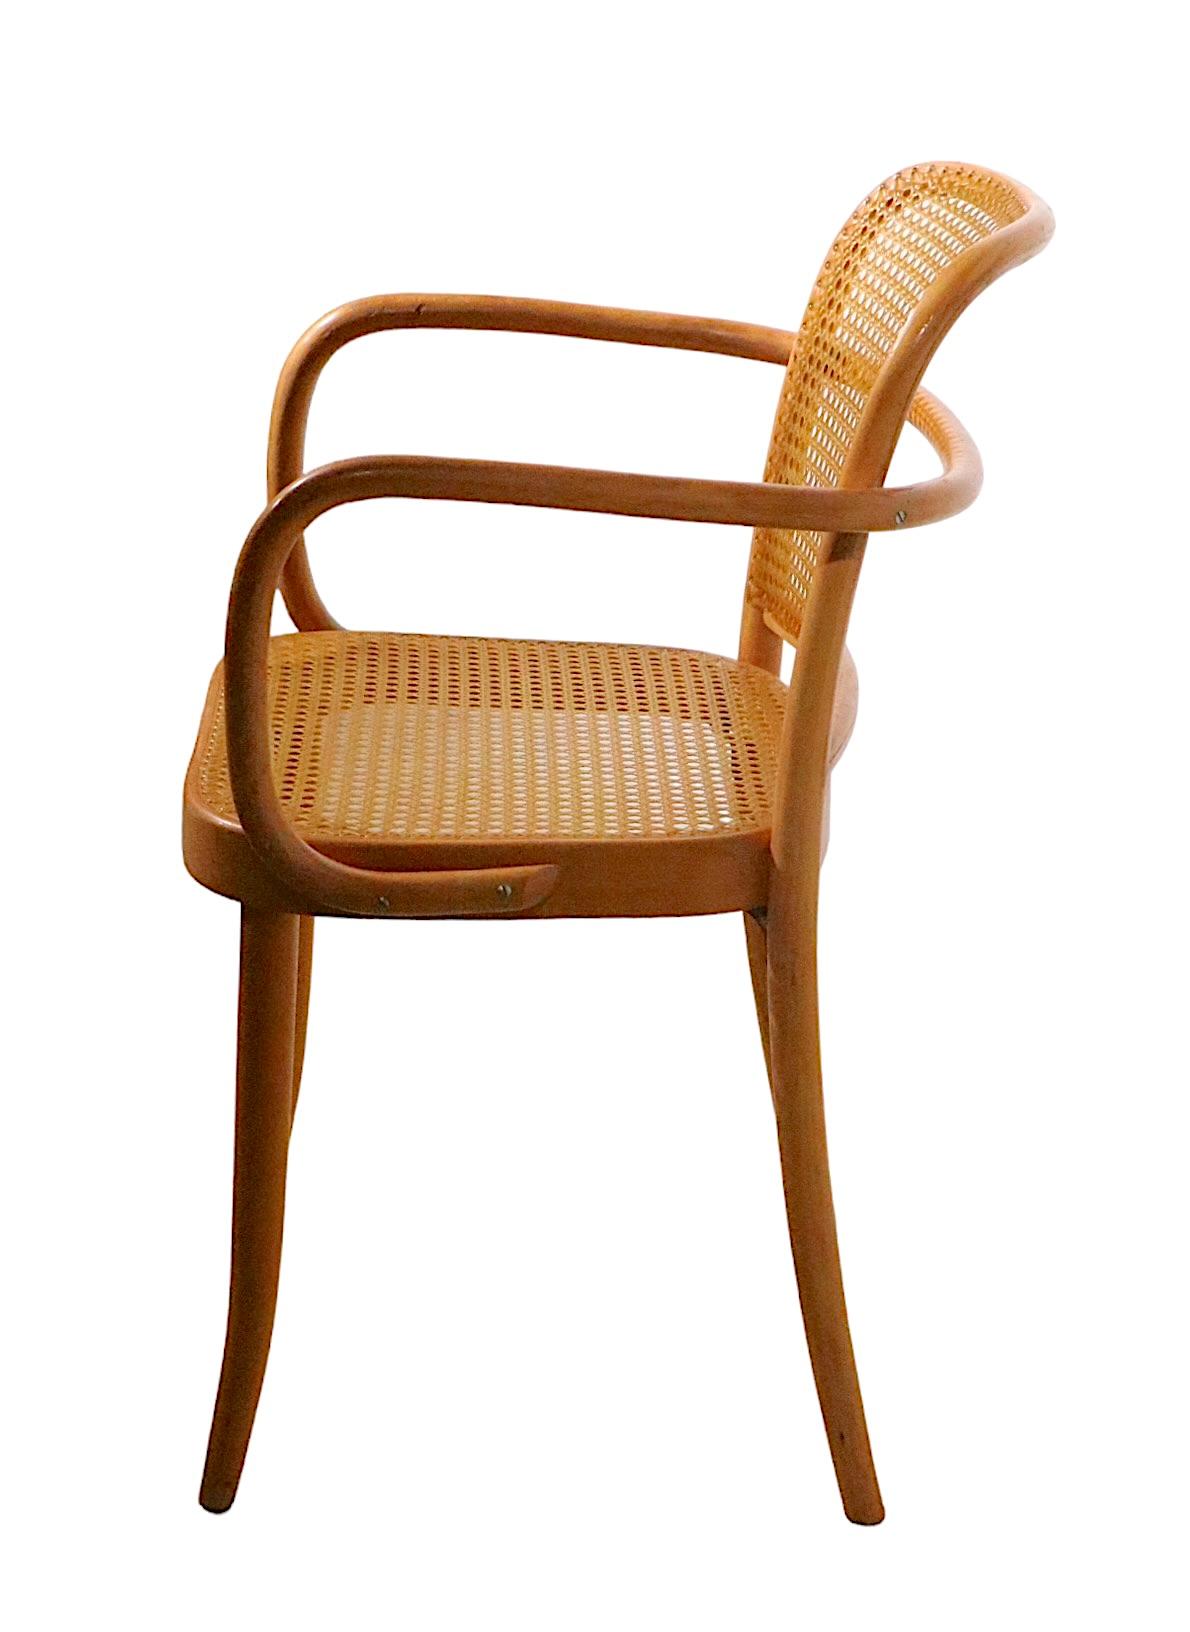 Set of 5 Josef Frank Prague Chairs Made in Czechoslovakia, circa 1970s For Sale 13